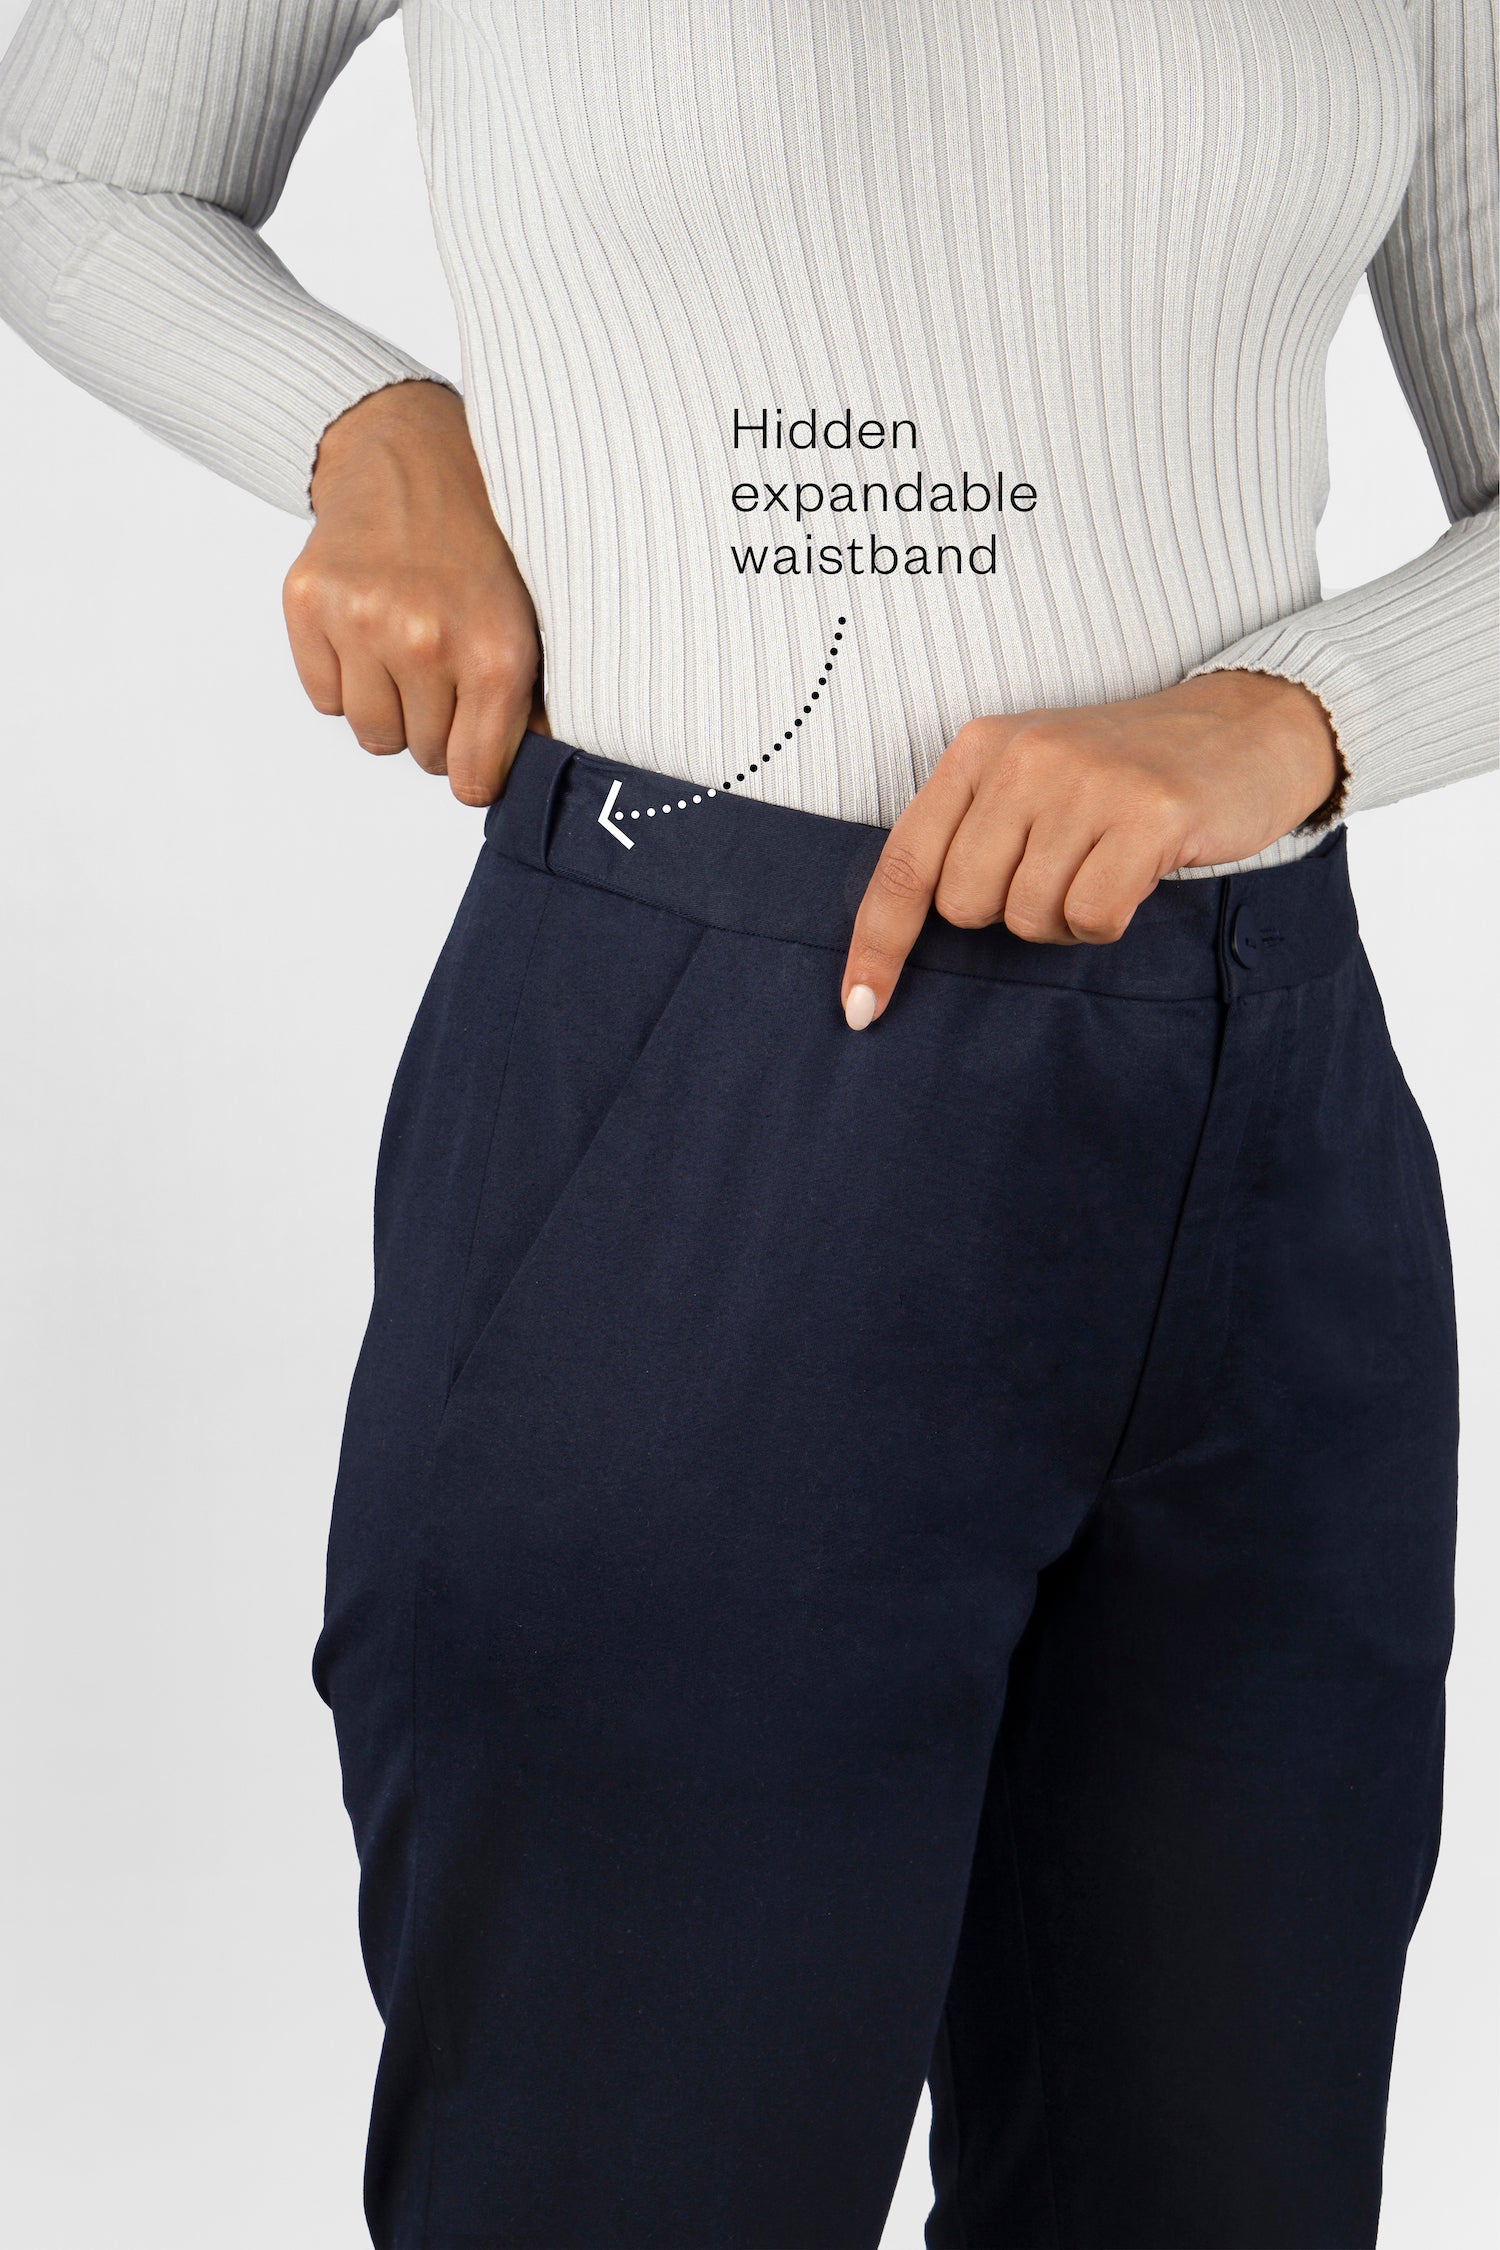 The Flex Waist Pant by Aam is a chic, cotton trouser with a hidden expandable waistband that provides 2-3